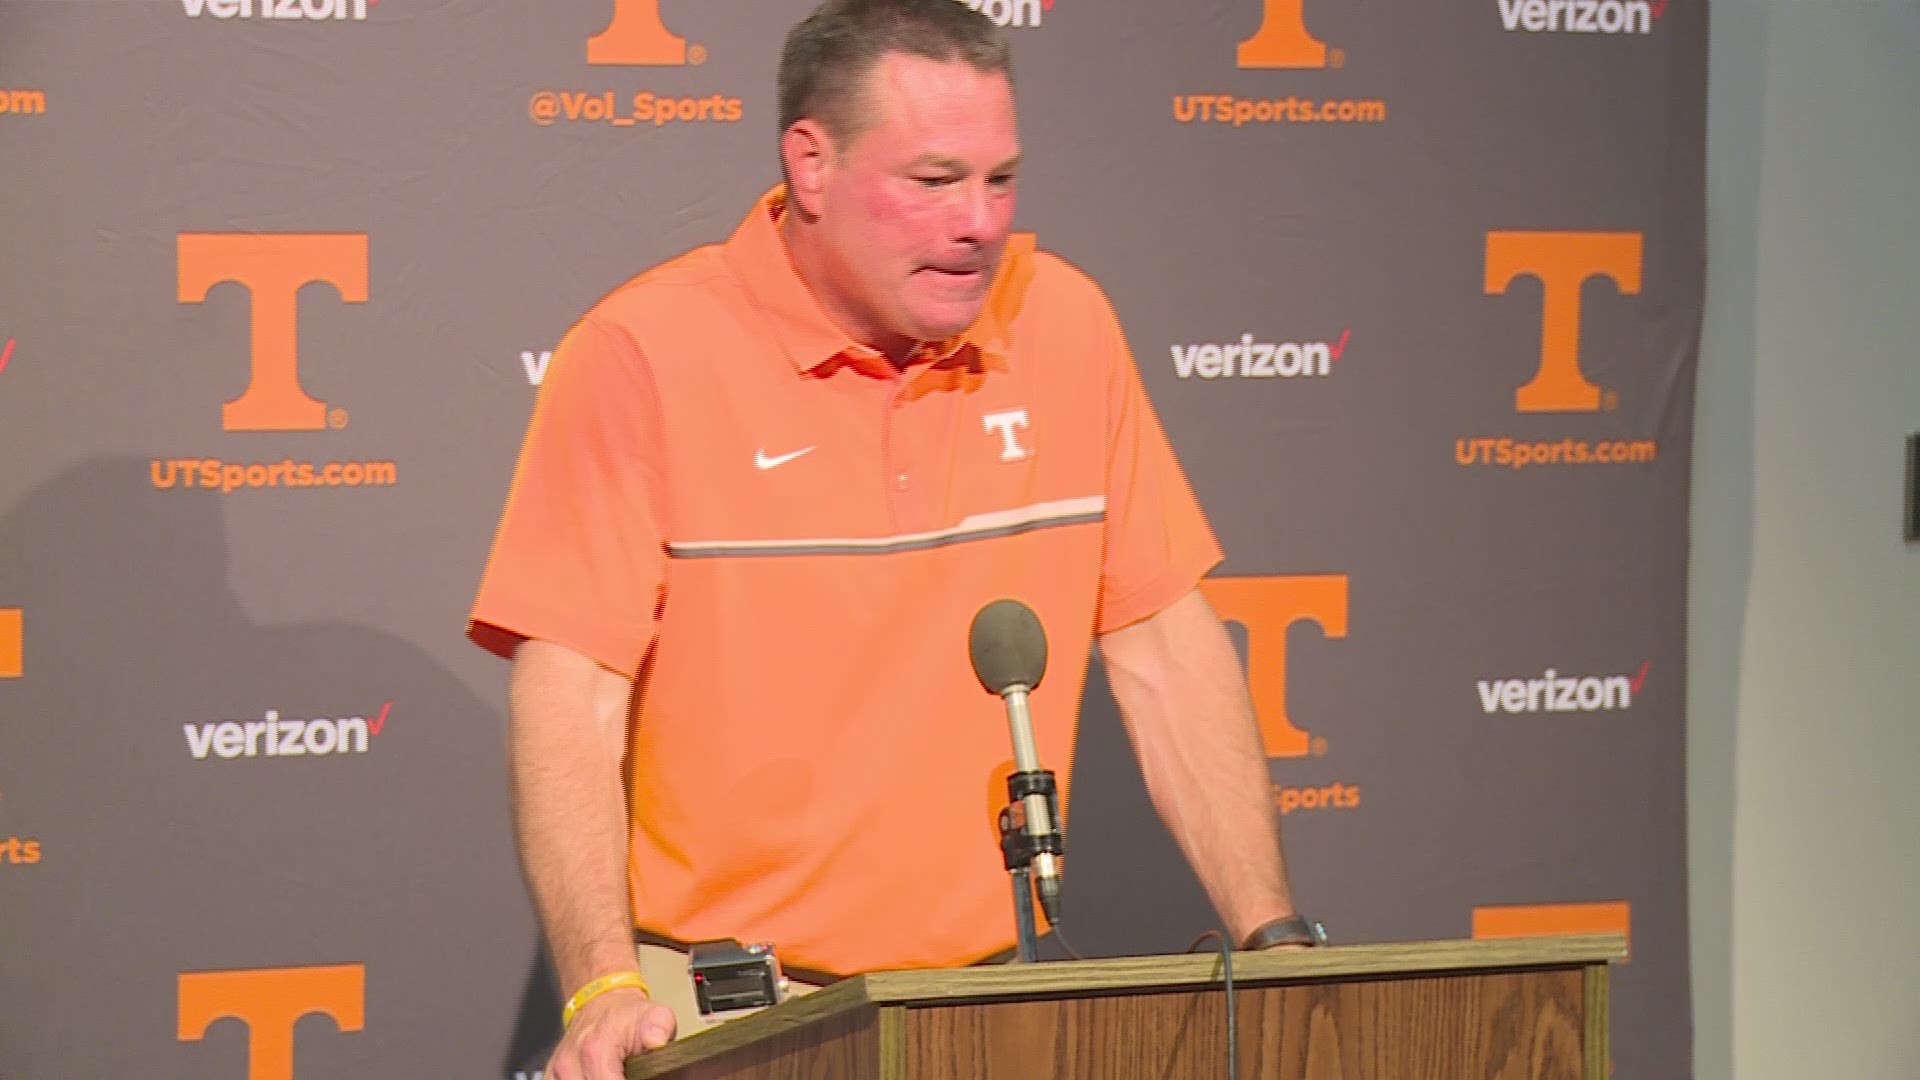 Coach Butch Jones speaks about the Vols miraculous win over the Georgia Bulldogs in the last seconds.